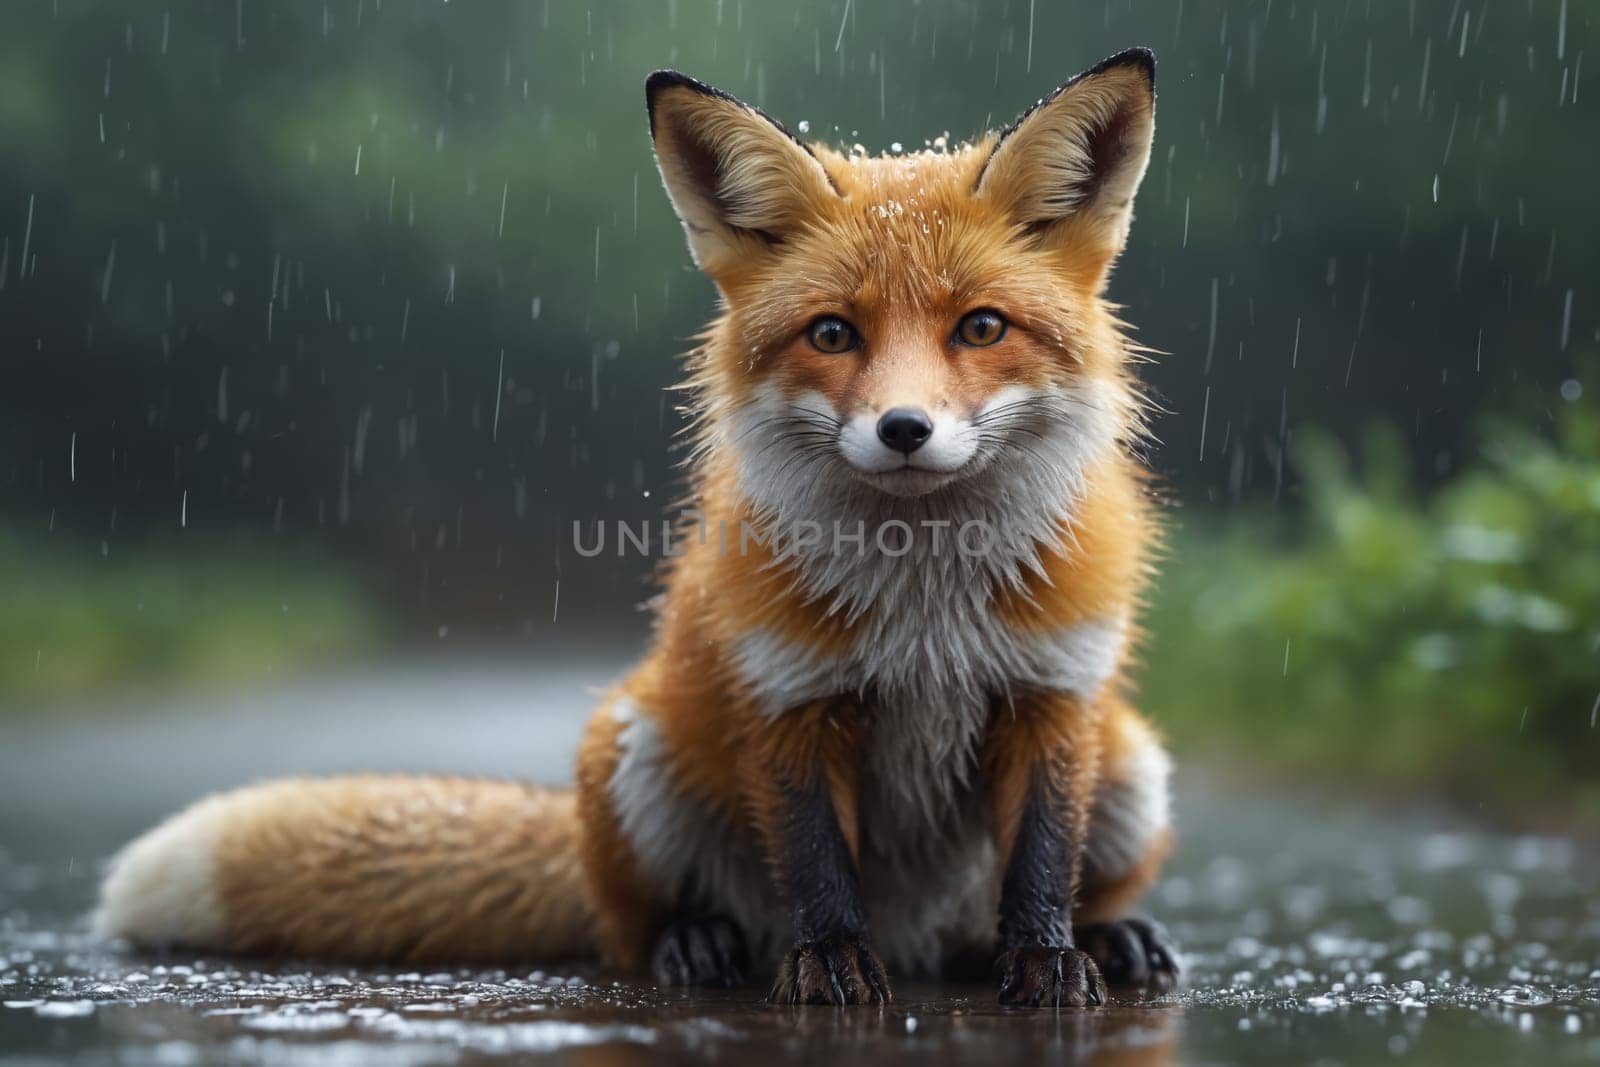 A red fox finds solace in the rain, its wet fur revealing a spectrum of earthy hues.